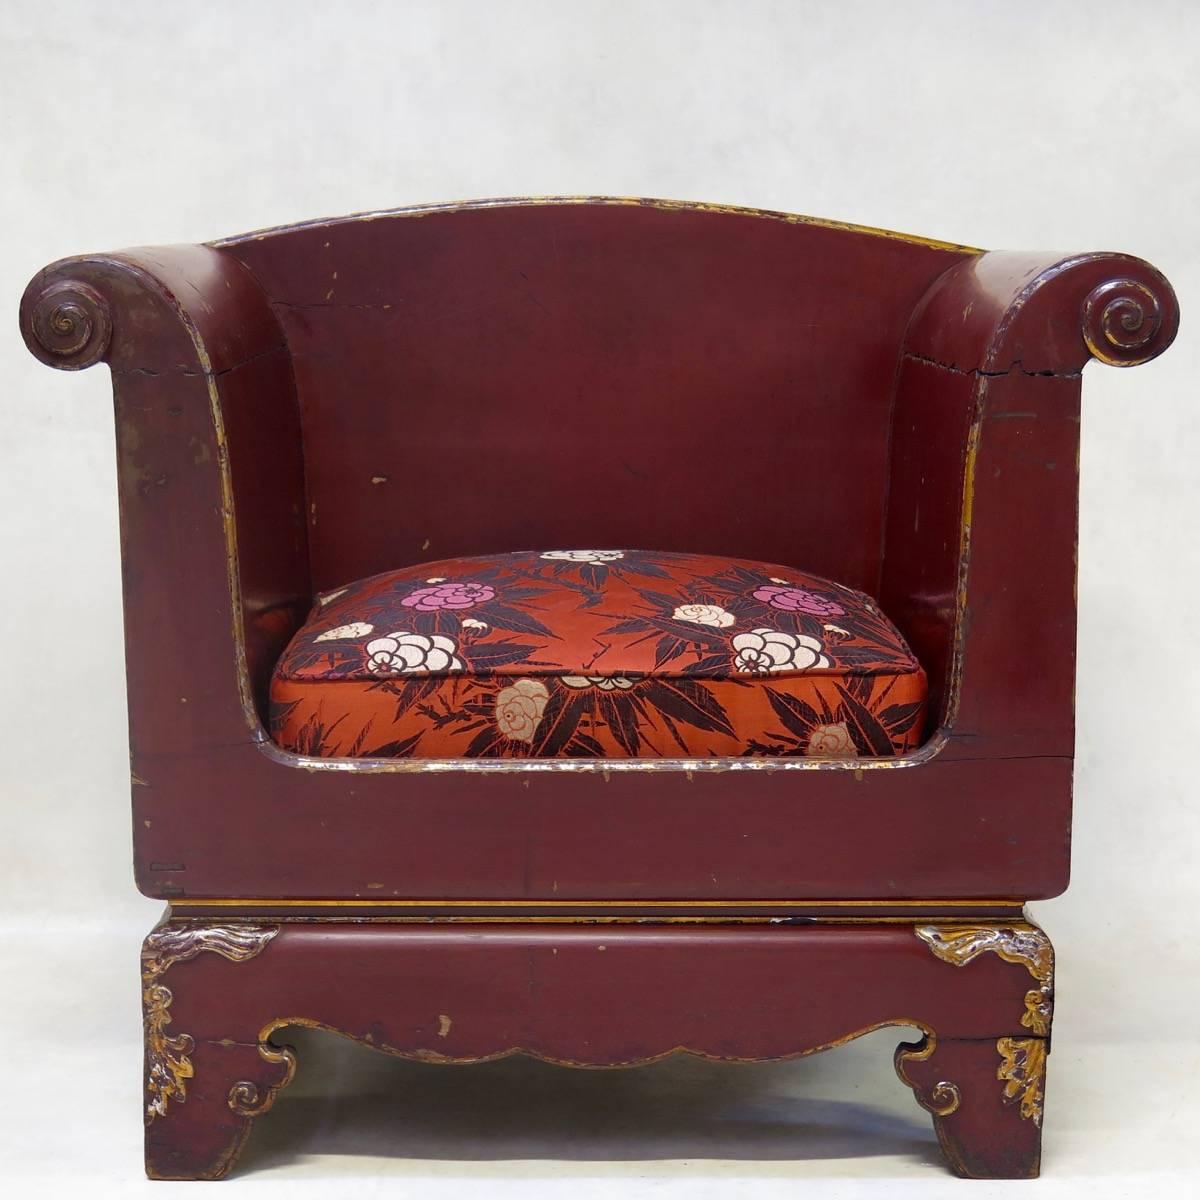 Elegant and unusual pair of wide, deep-burgundy lacquered armchairs. The scrolled armrests and the feet are highlighted with gold. The seats have been newly upholstered in vintage silk Art Deco fabric.